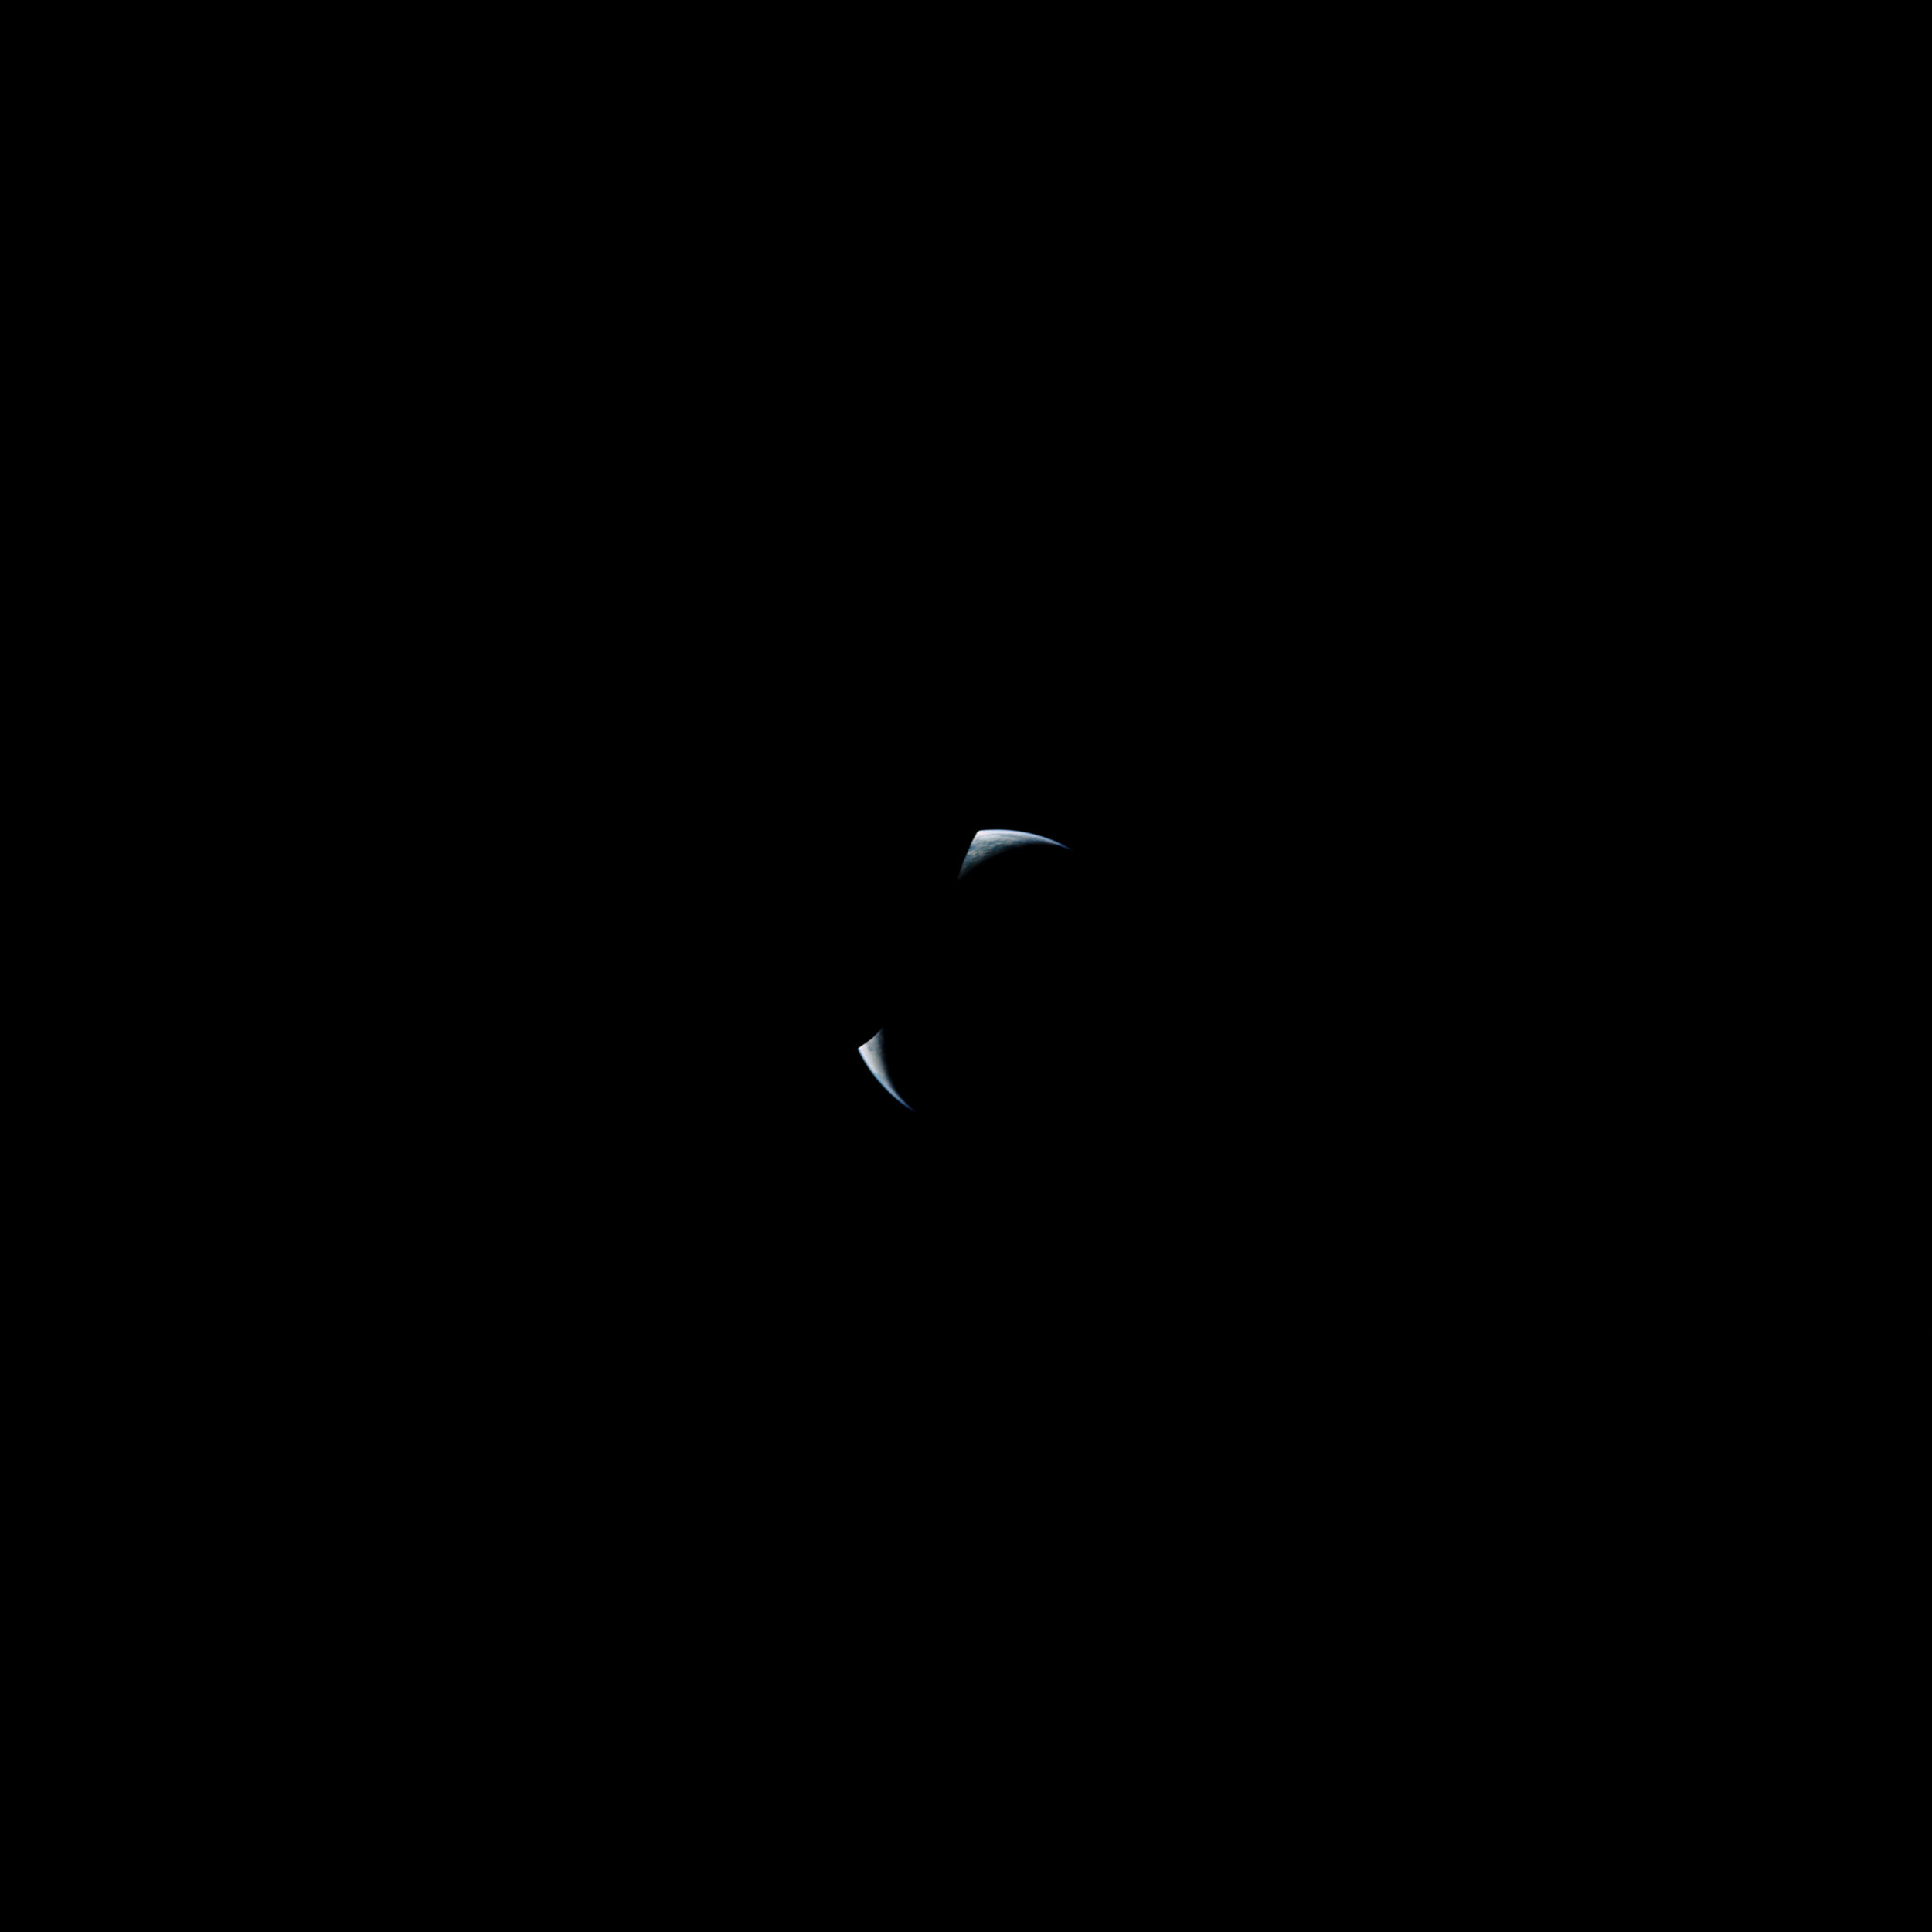  Apollo 17  A rare sequence capturing an earthset. The Earth disappears behind an unlit lunar horizon—consumed in the darkness.   Full Resolution   Date – ~15:25 UTC, 16 December 1972 Lens – Zeiss Sonnar ƒ-5.6/250mm Code – AS17-152-23280 Scan – LPI (